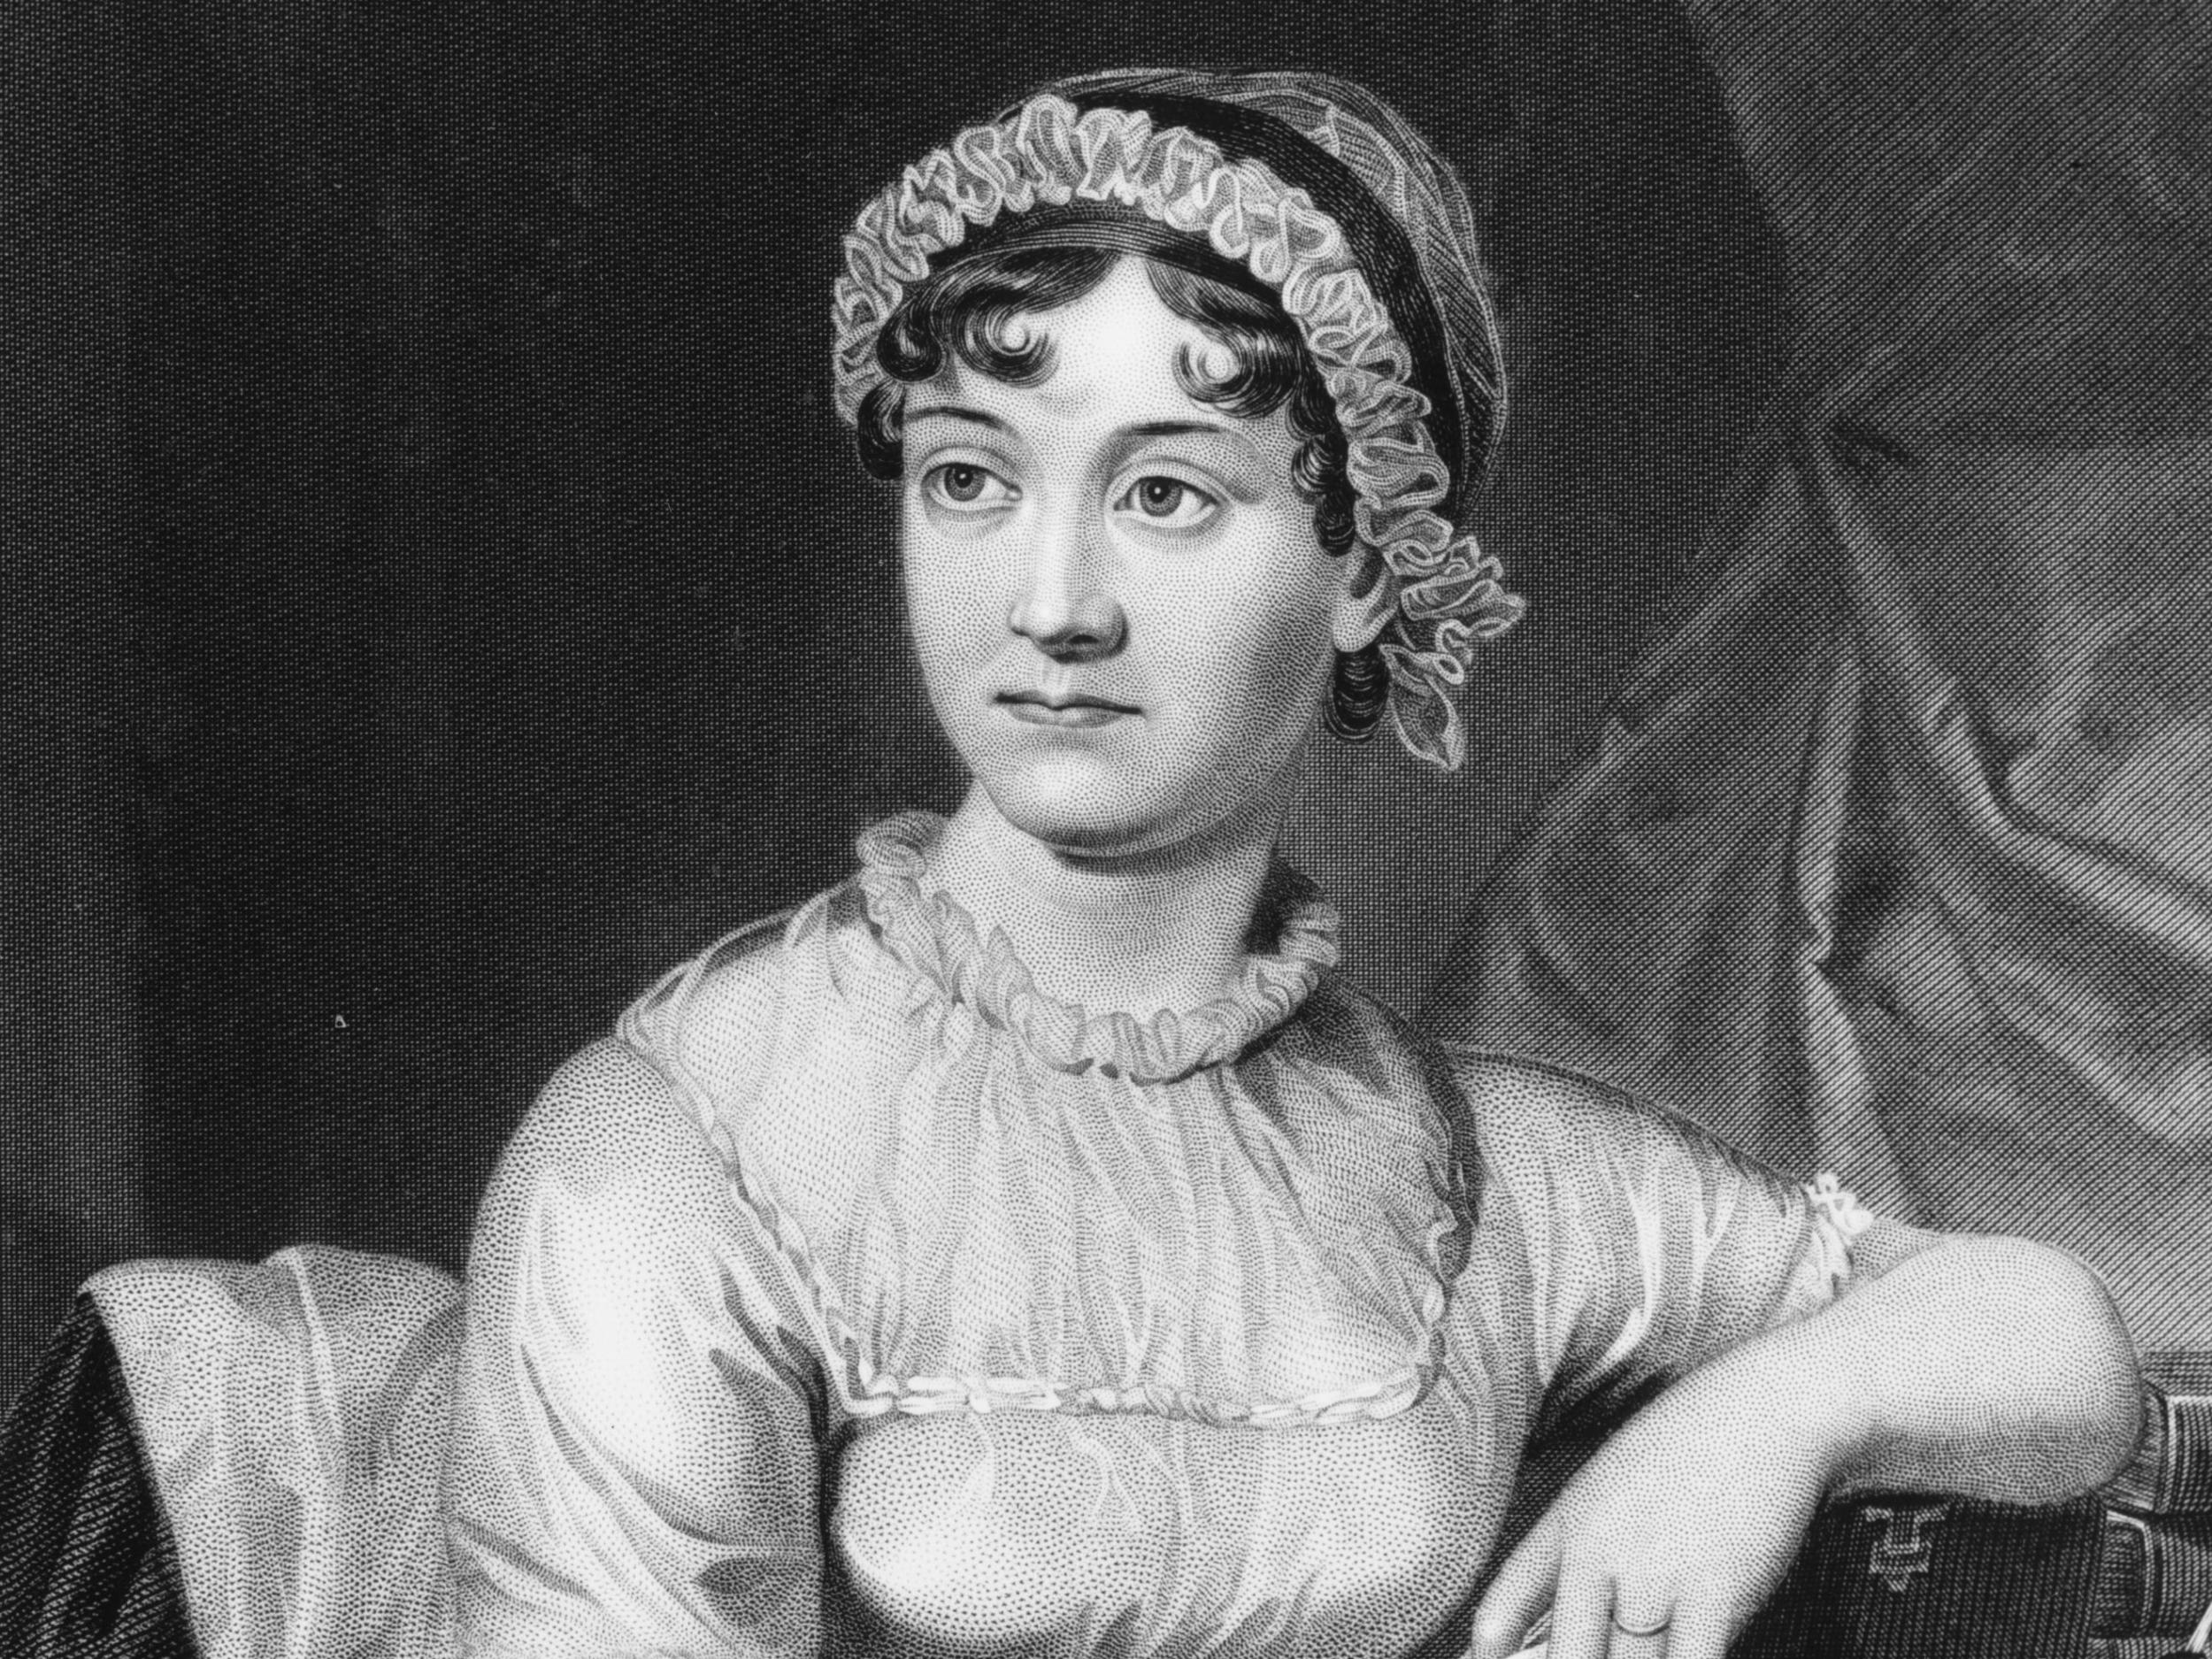 A statue of author Jane Austen, thought to be the very first, will be unveiled on the 200th anniversary of her death